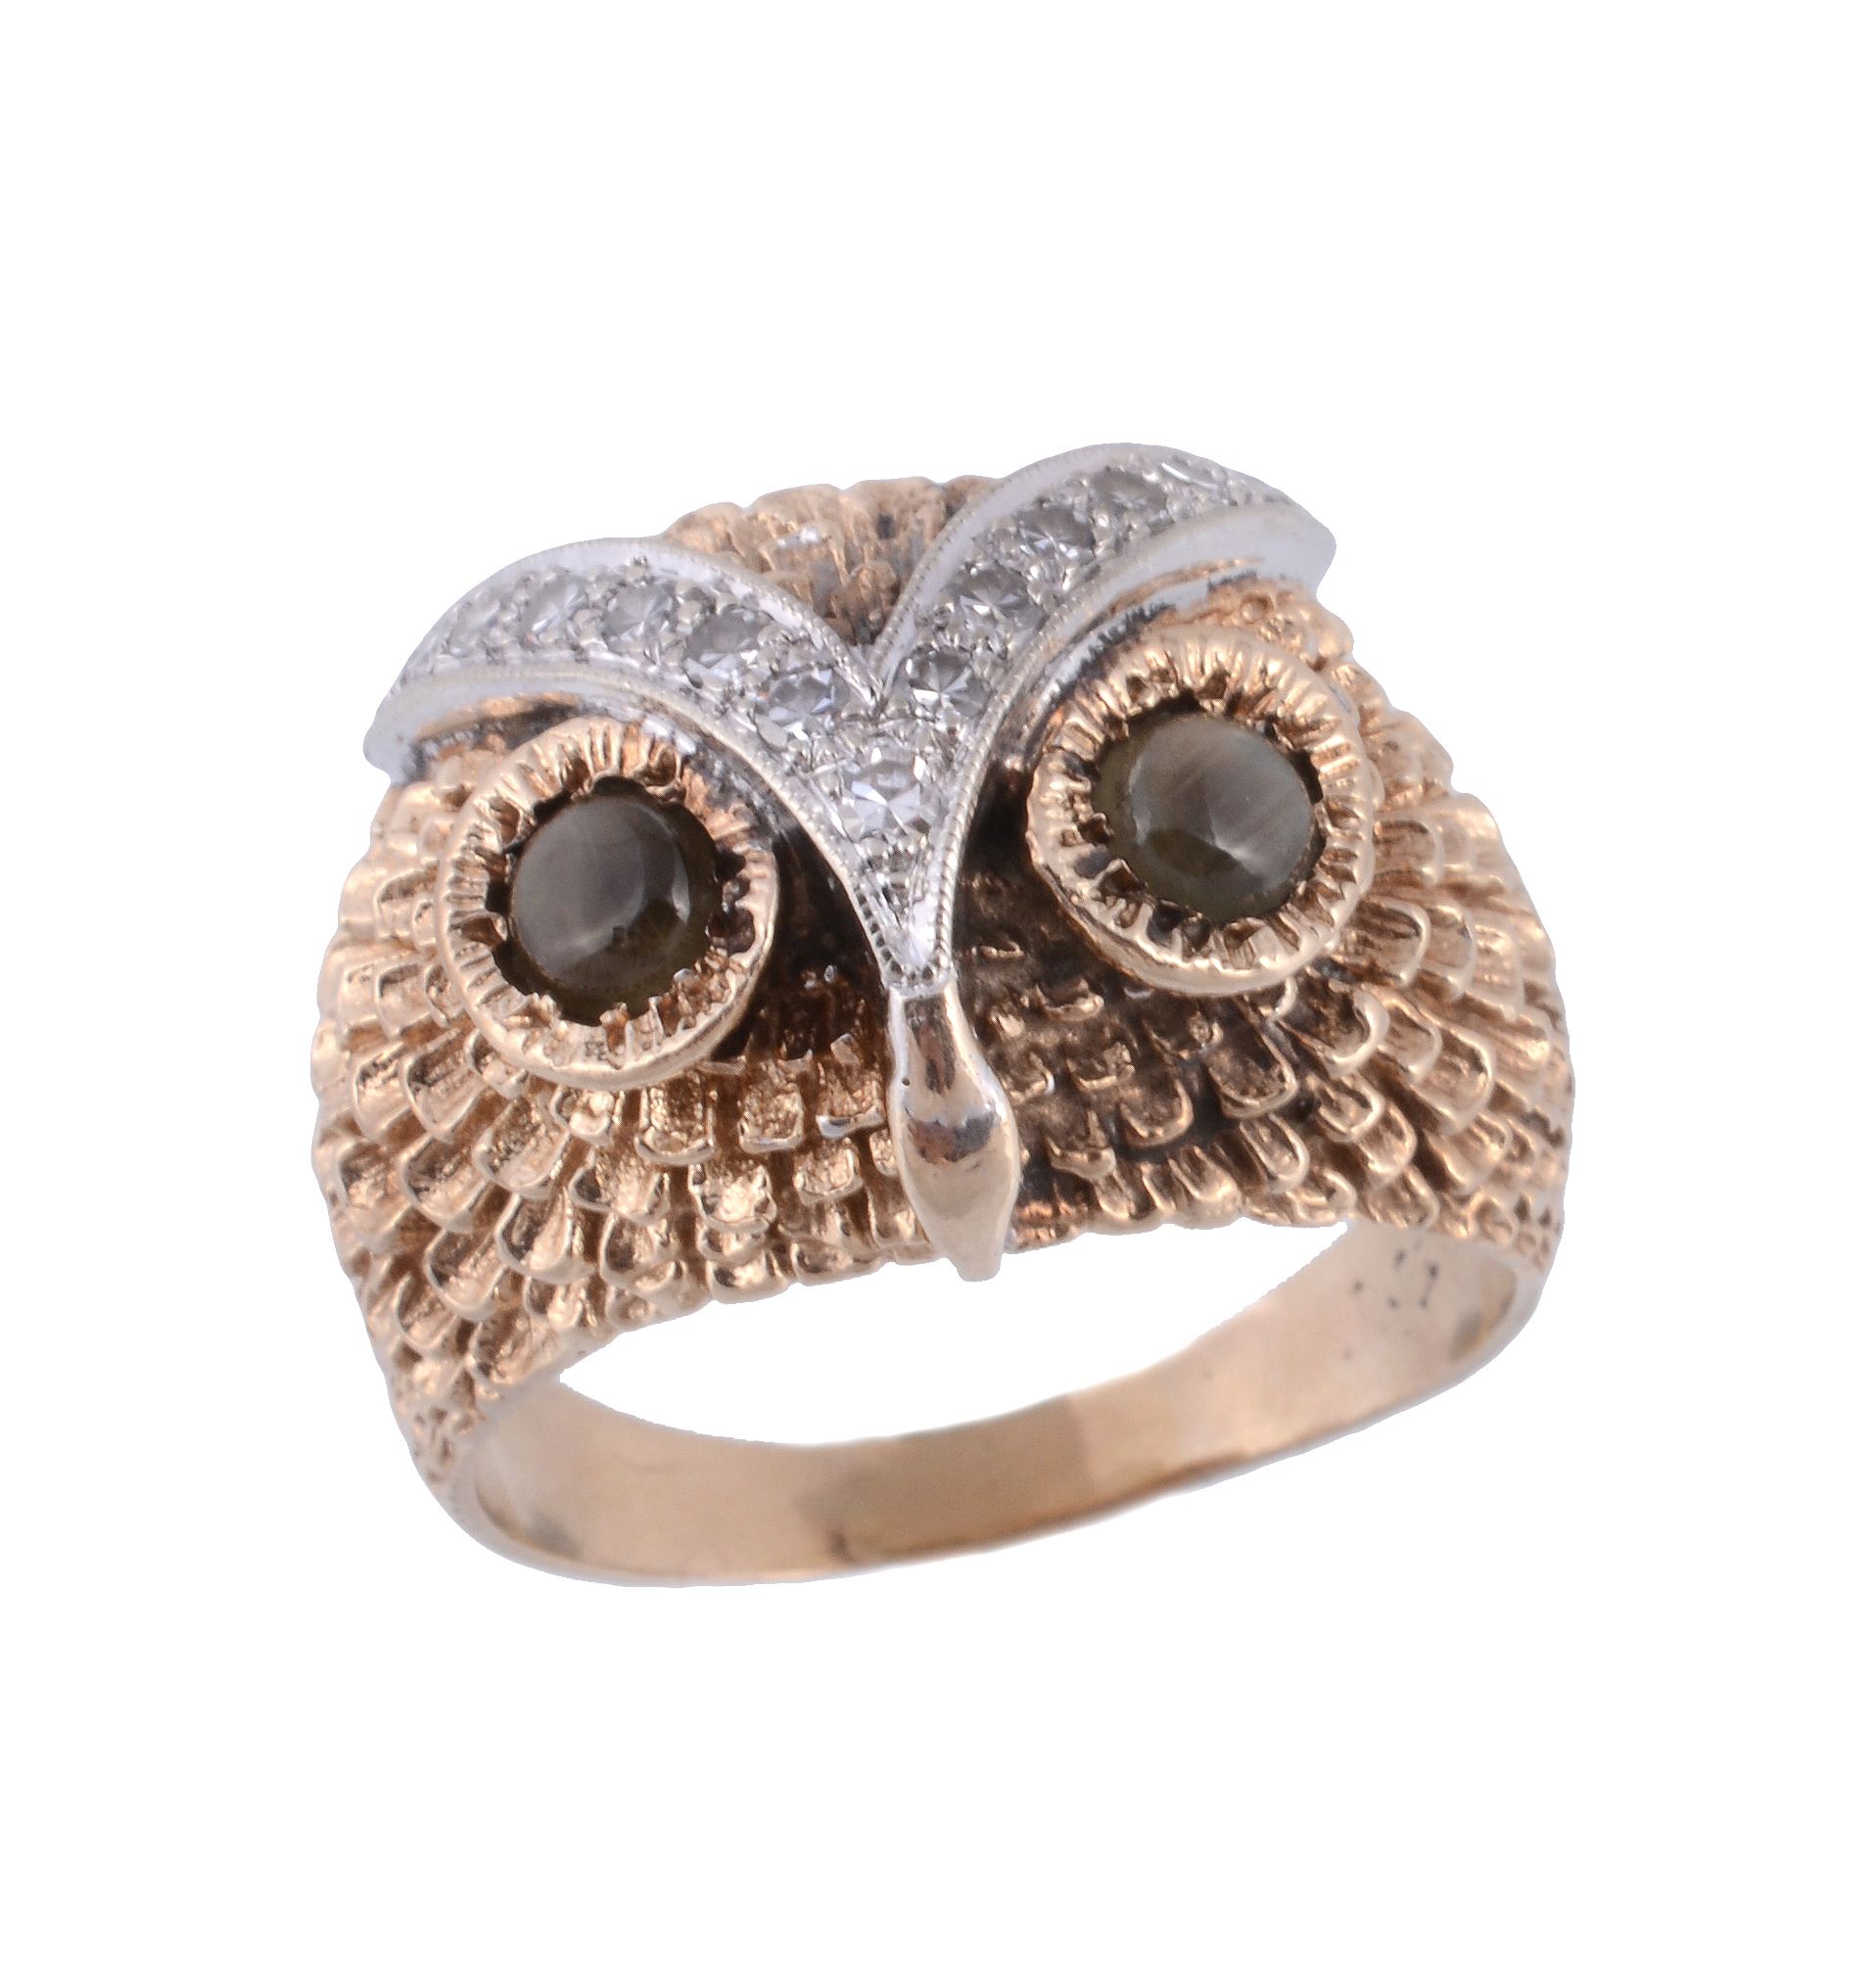 An owl ring,   designed as an owl's head, with textured feathers and circular shaped labradorite to